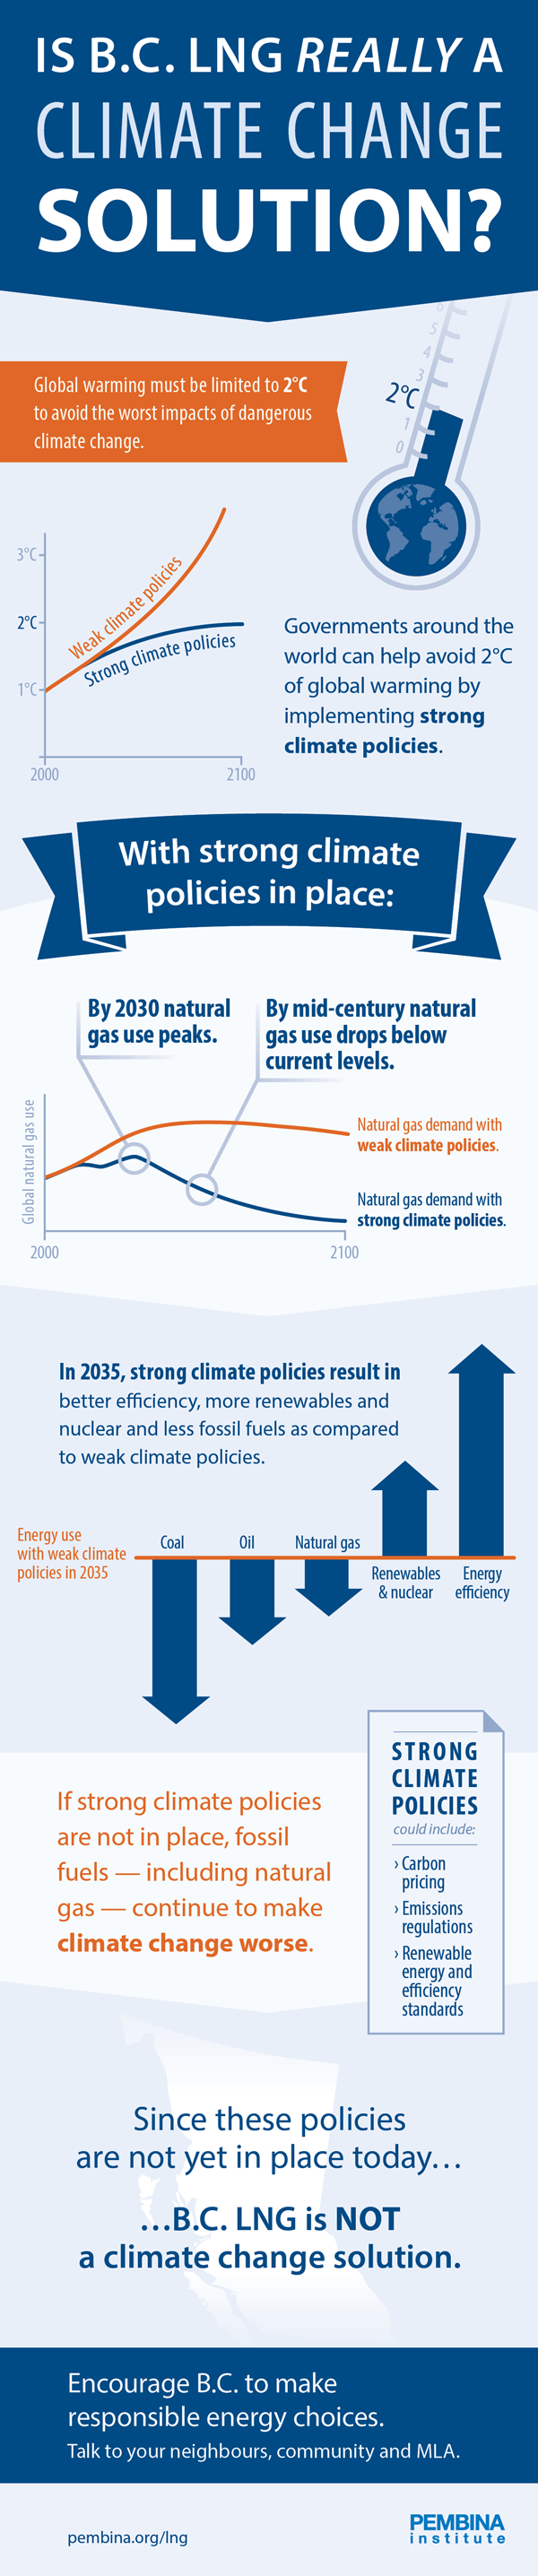 B.C. LNG & climate change infographic